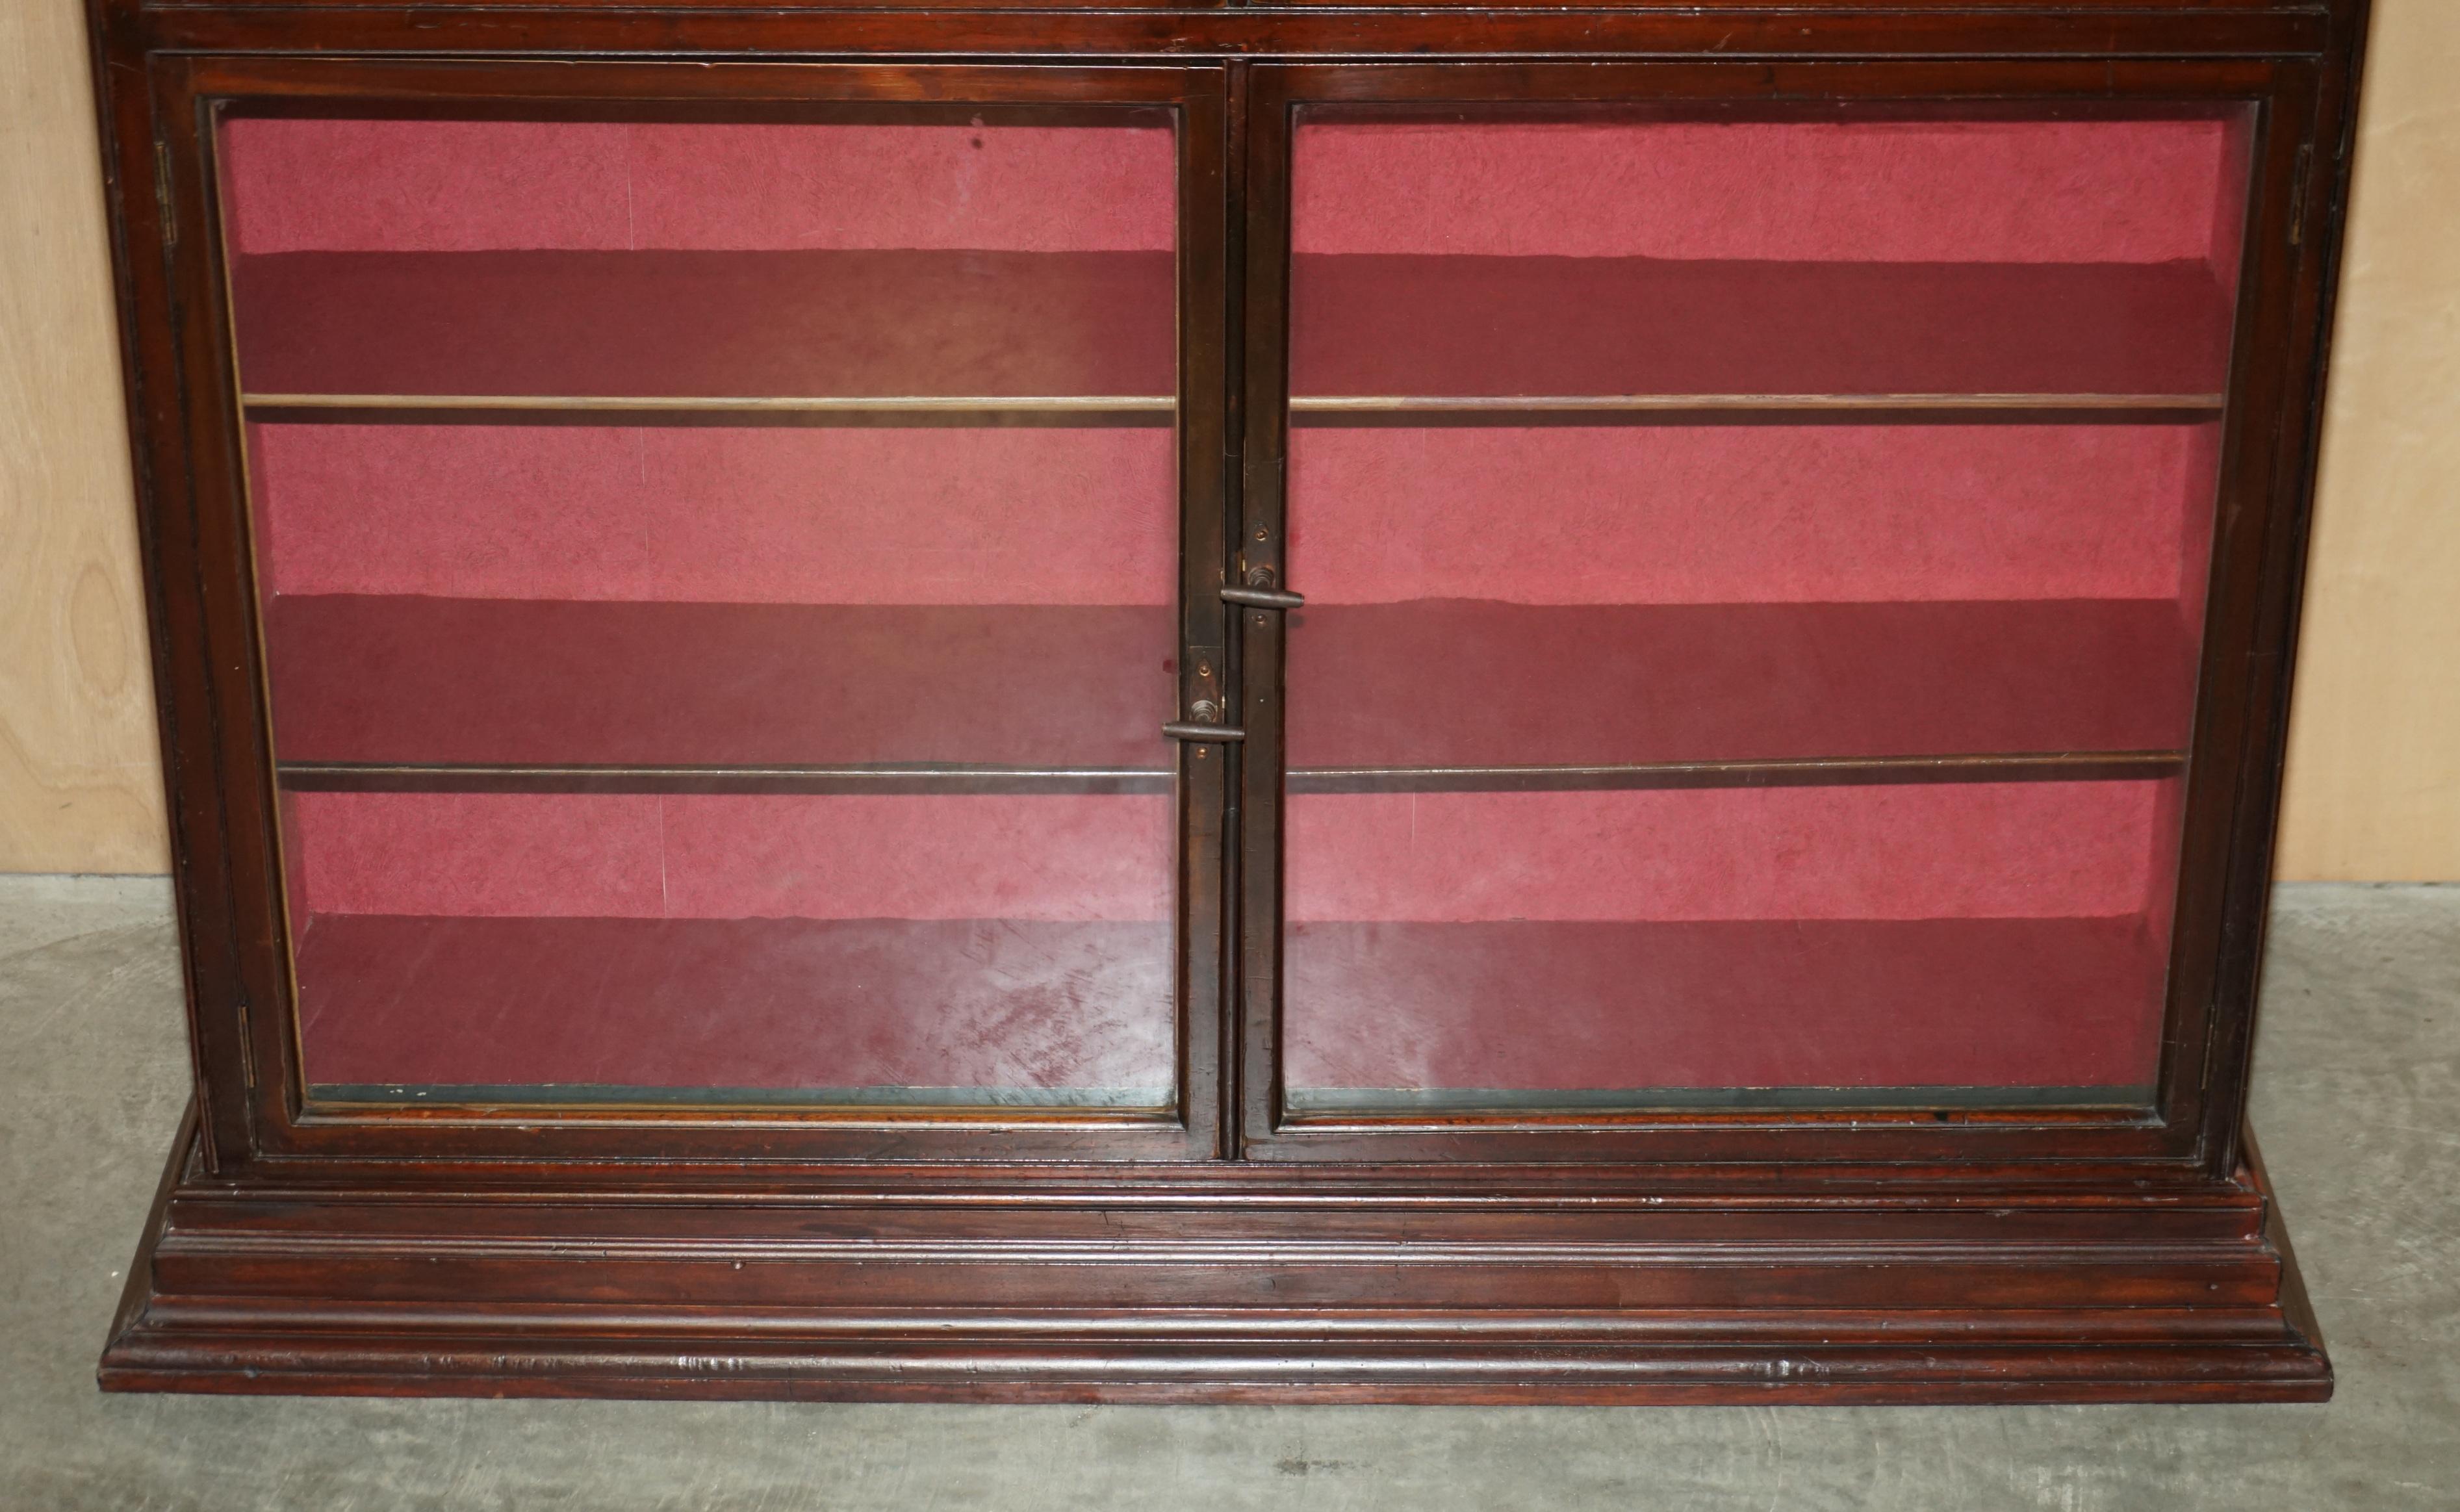 English LARGE VICTORIAN HABERDASHERY APOTHECARY SHOPS CABiNET GLAZED DOOR BOOKCASE For Sale